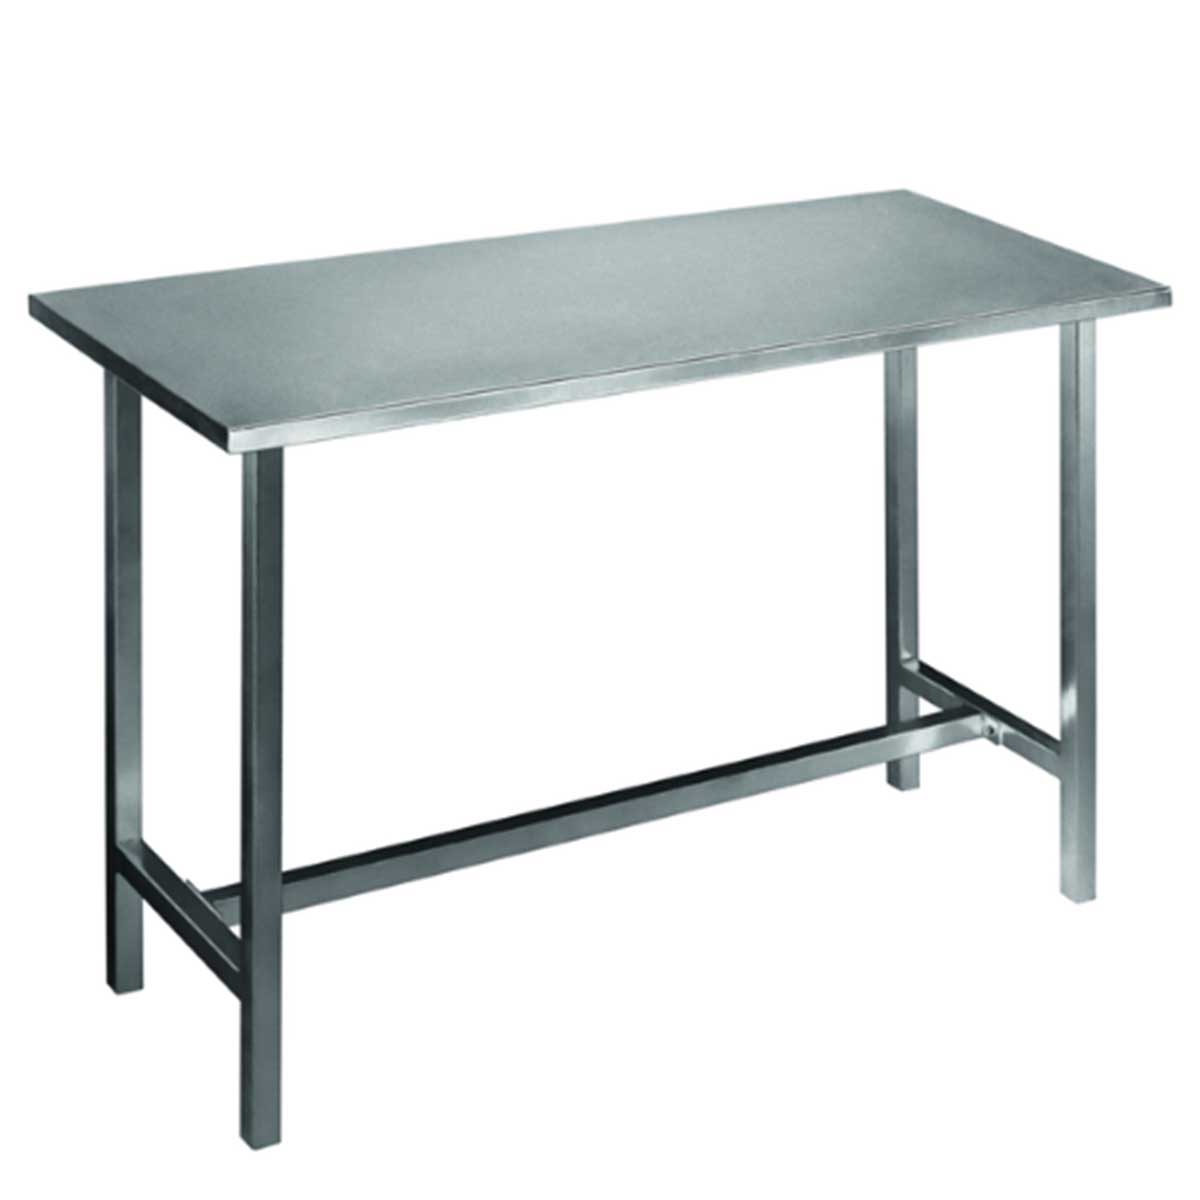 Metal Office Table Manufacturers, Suppliers in Dwarka Sector 15